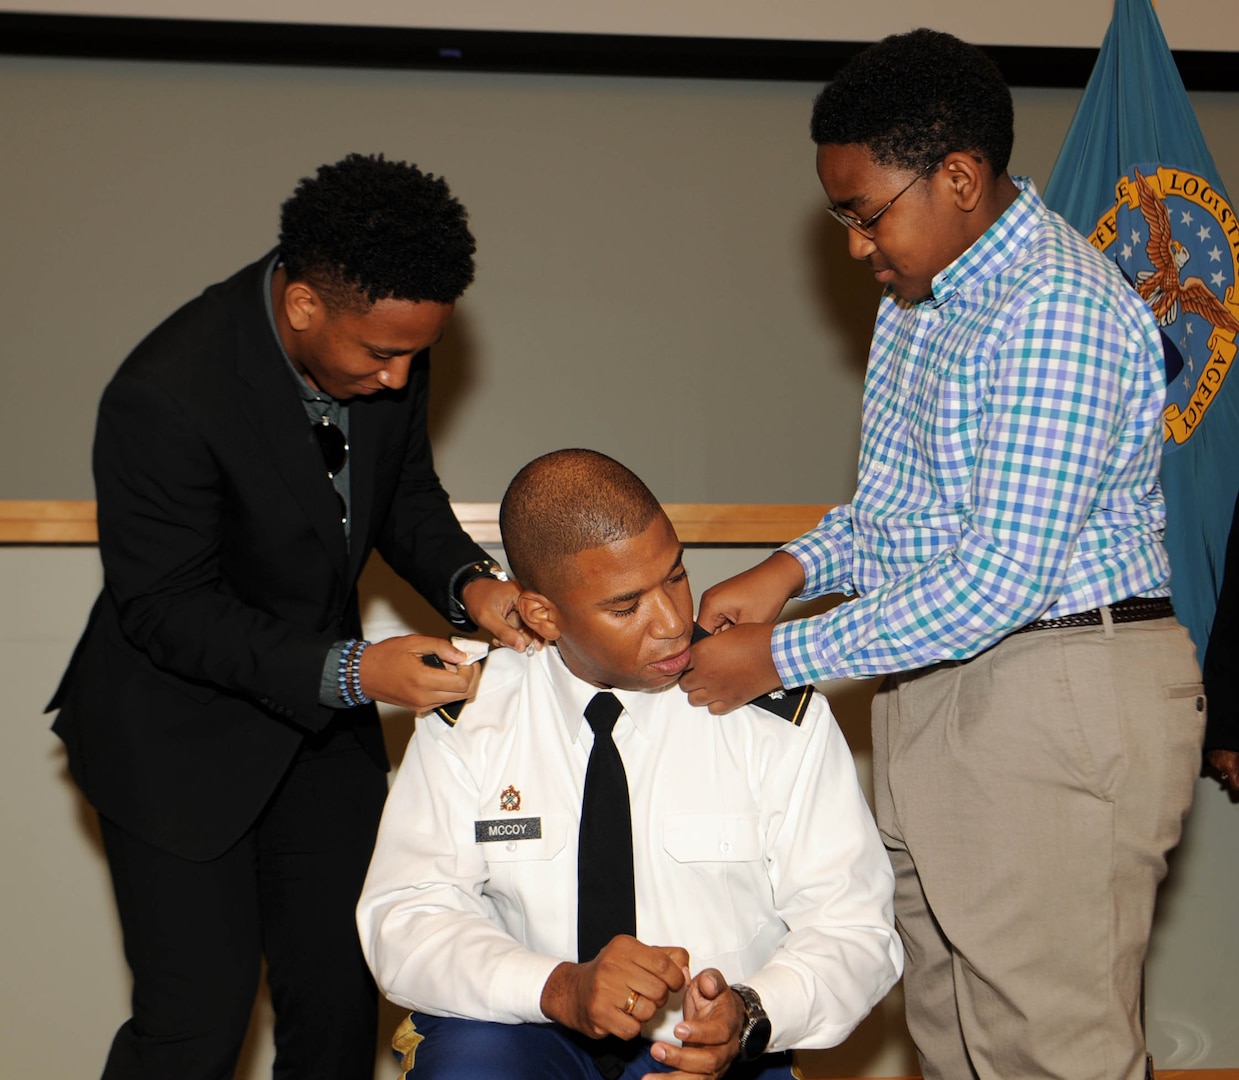 Sons, Solomon McCoy, left, and Joseph McCoy, right, place the new colonel rank on the shoulders of their father, Army Col. Eric McCoy, center, during his promotion ceremony at DLA Troop Support in Philadelphia, Oct. 3, 2019. McCoy, a Baltimore native, is the Troop Support Subsistence supply chain director. (Photo by Ed Maldonado/DLA Troop Support)